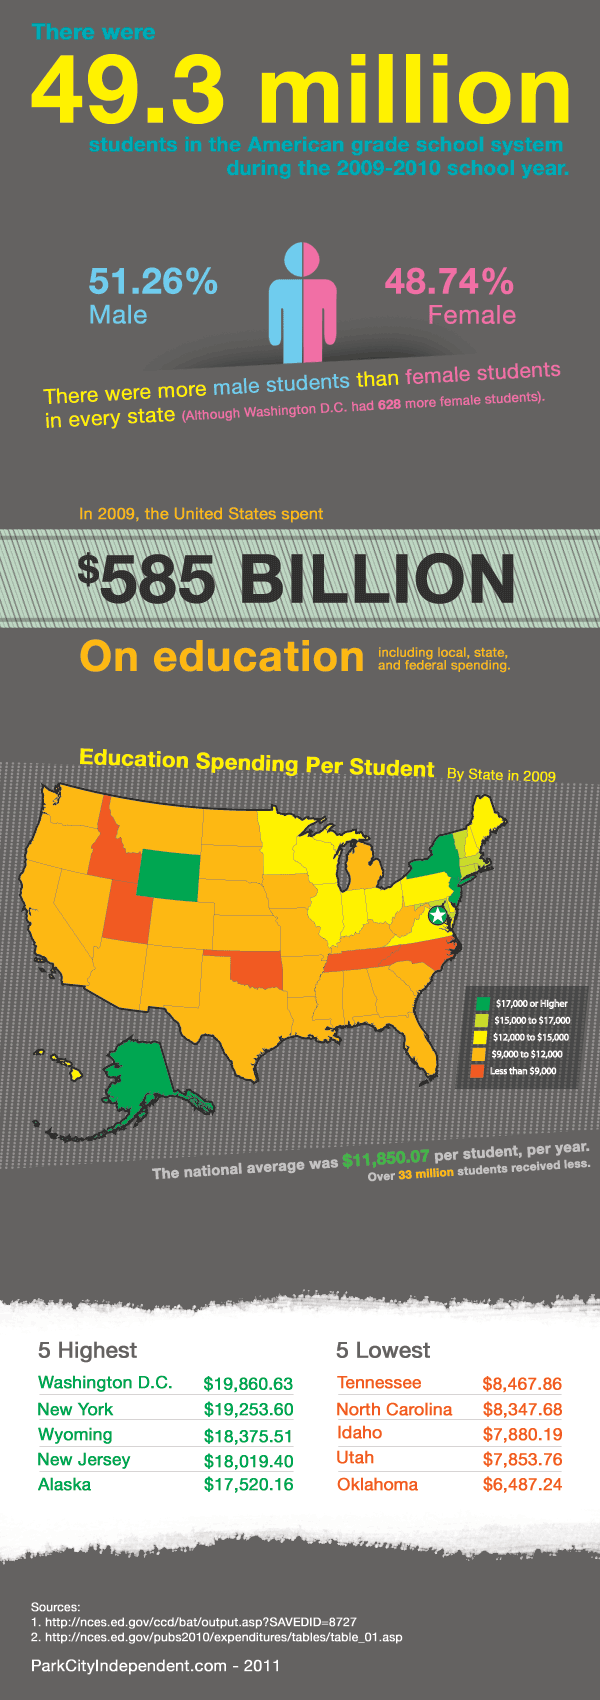 Differences in education spending - infographic